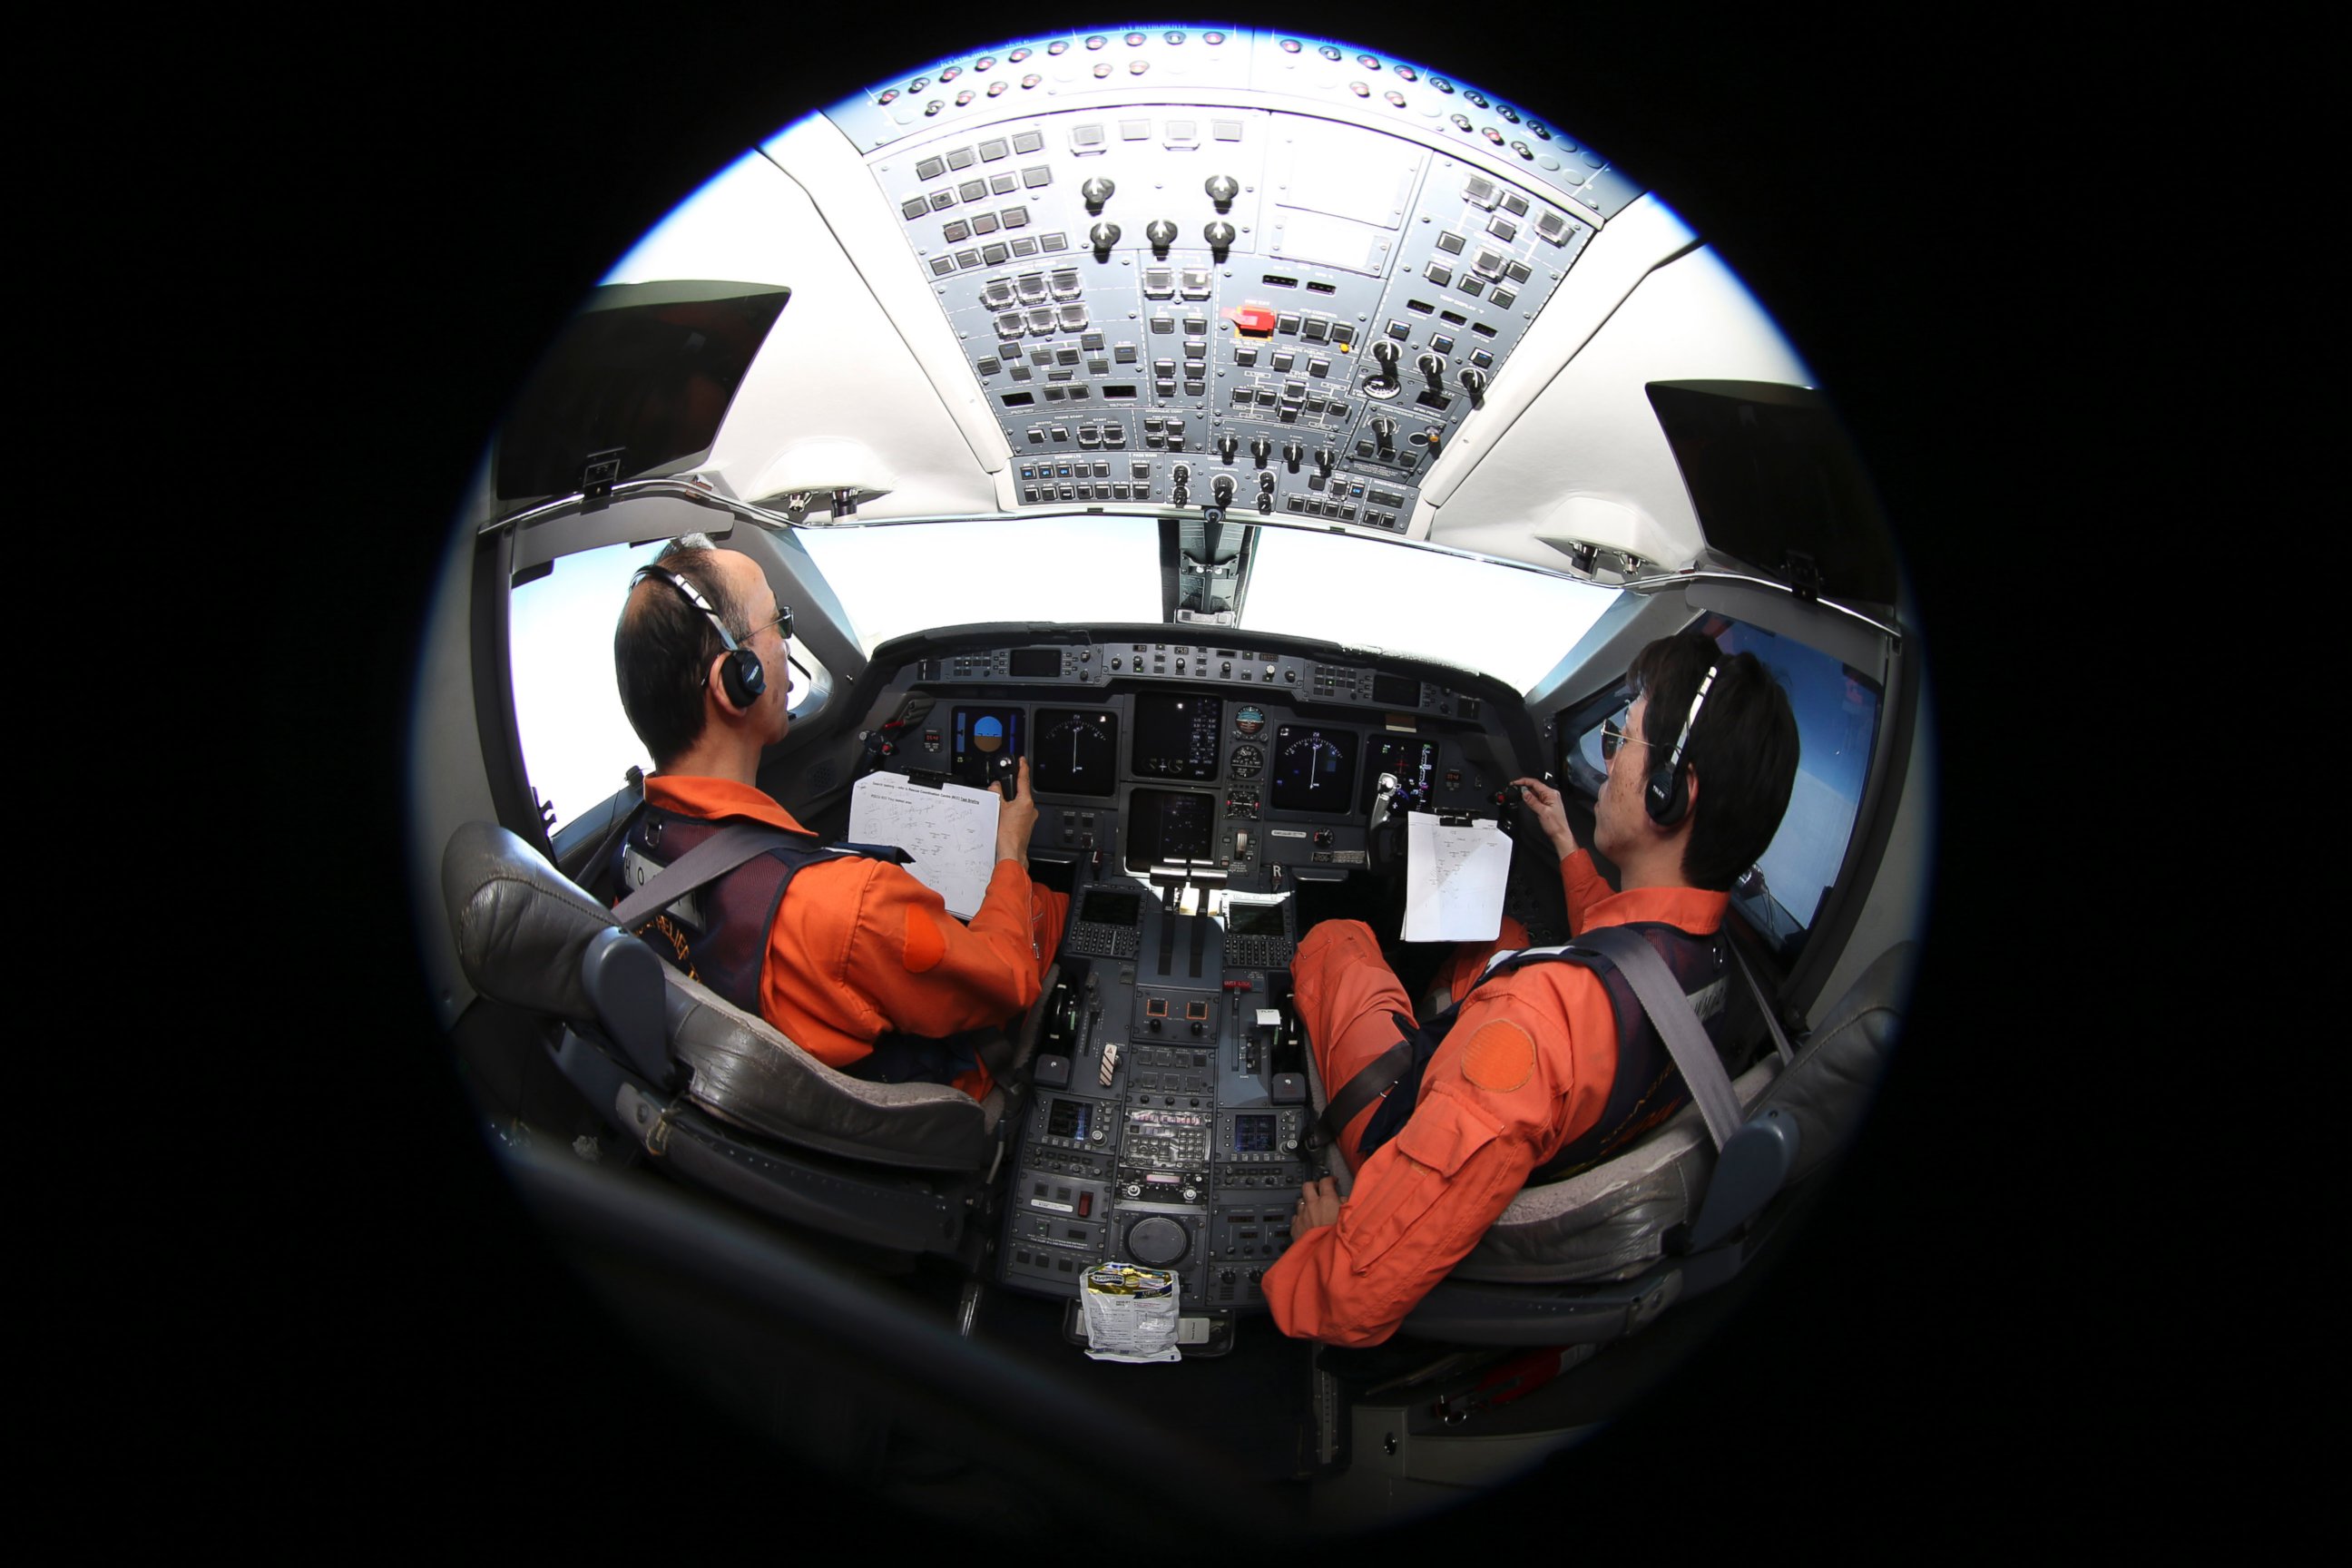 PHOTO: Captain of the Japan Coast Guard Gulfstream Makoto Hoshi, left, and his co-pilot Shunichi Yumiza sit in the cockpit during a search for the missing Malaysia Airlines Flight MH370 in the Southern Indian Ocean, near Australia, April 1, 2014. 